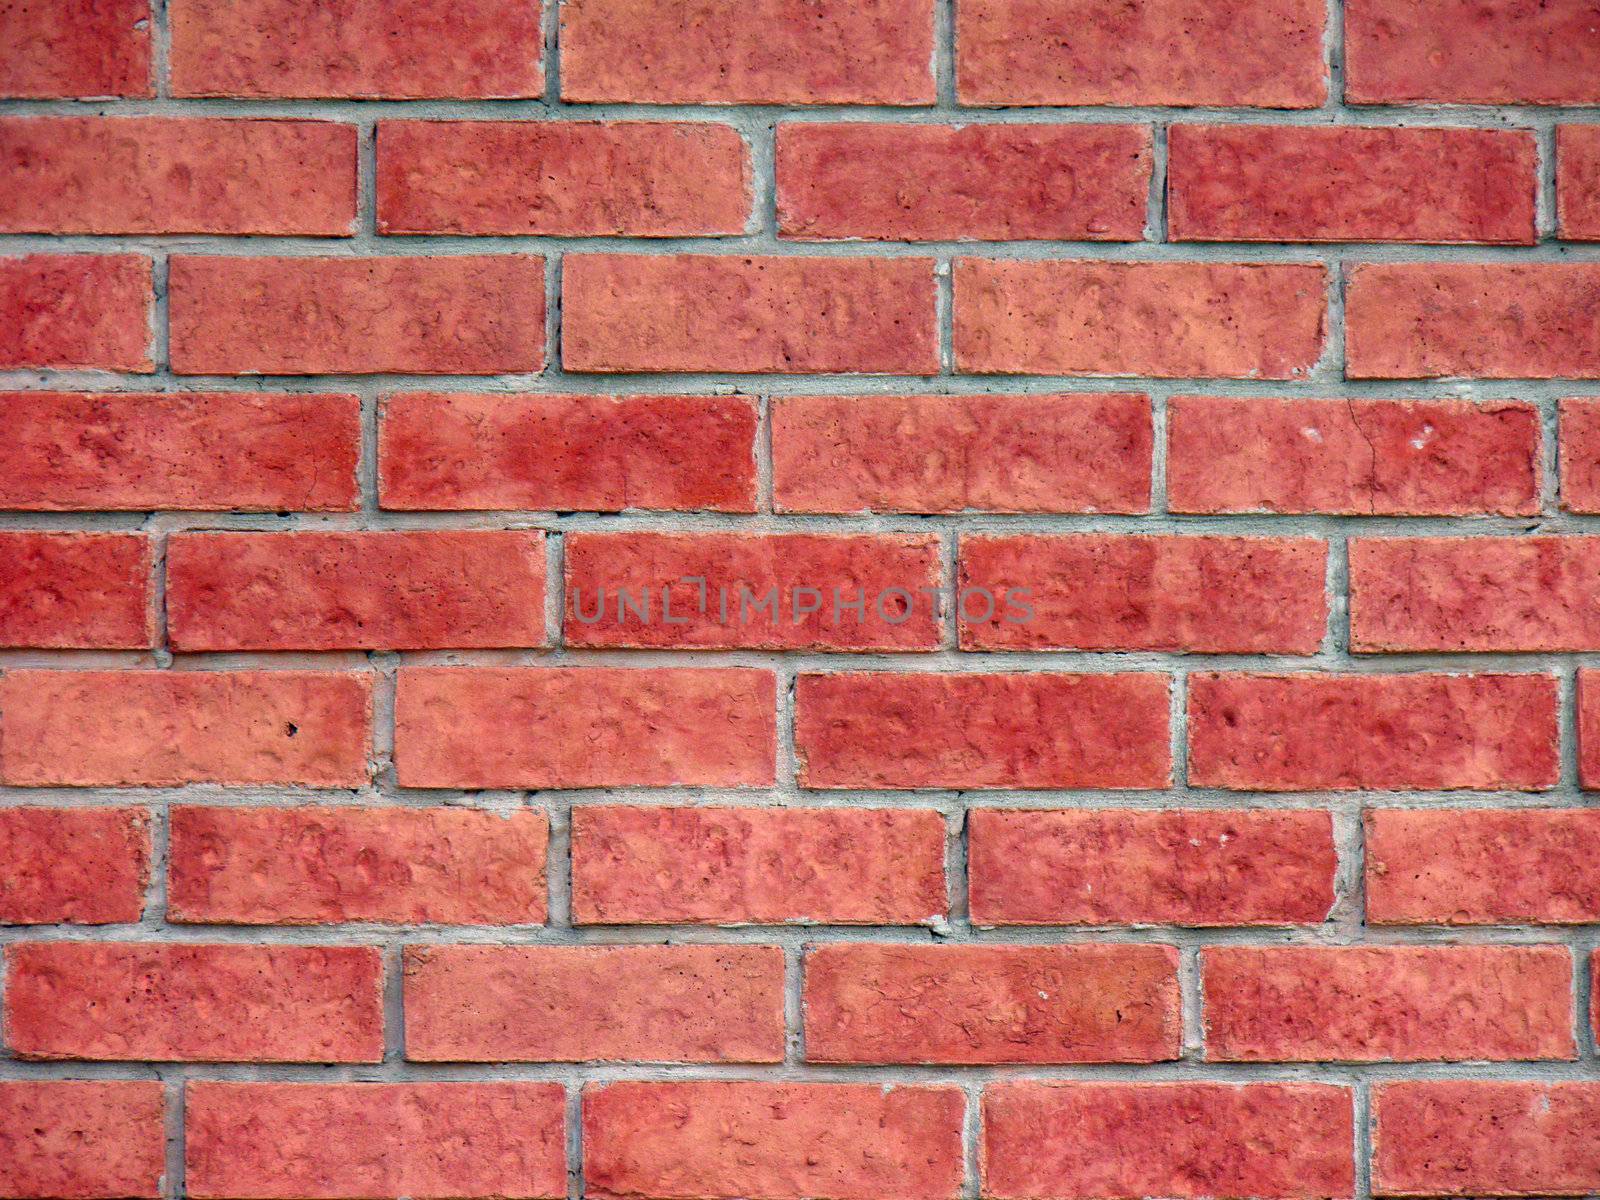 Brick wall from an old house by jconejo